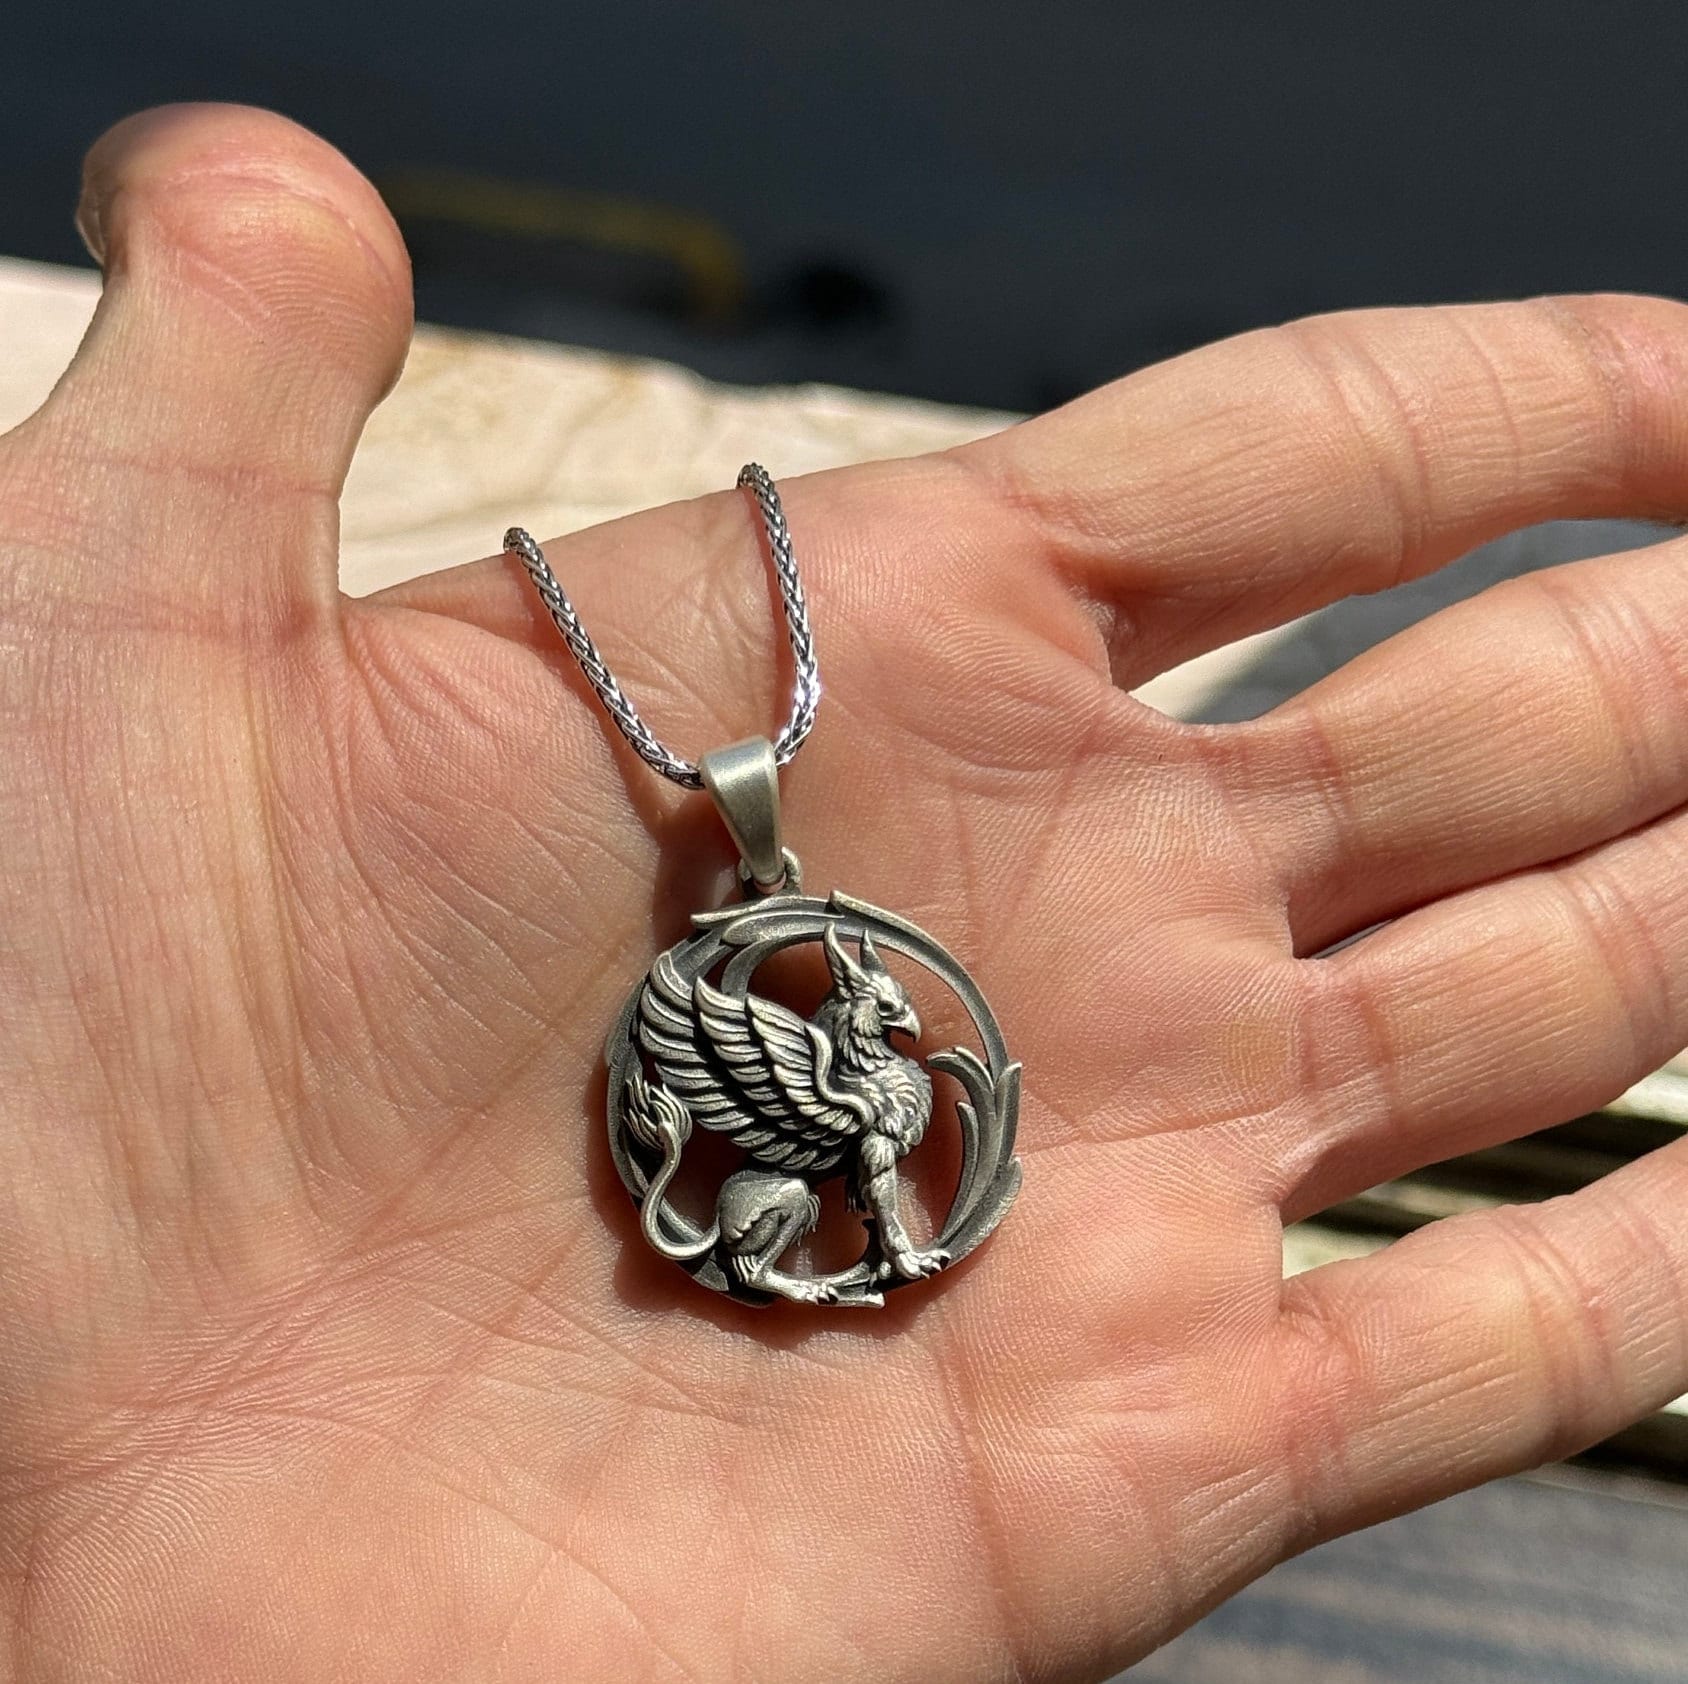 Silver Griffin Pendant - Mythical Gryphon Necklace, Fantasy Creature Jewelry, Magical Beast Gift, Mythological Bird